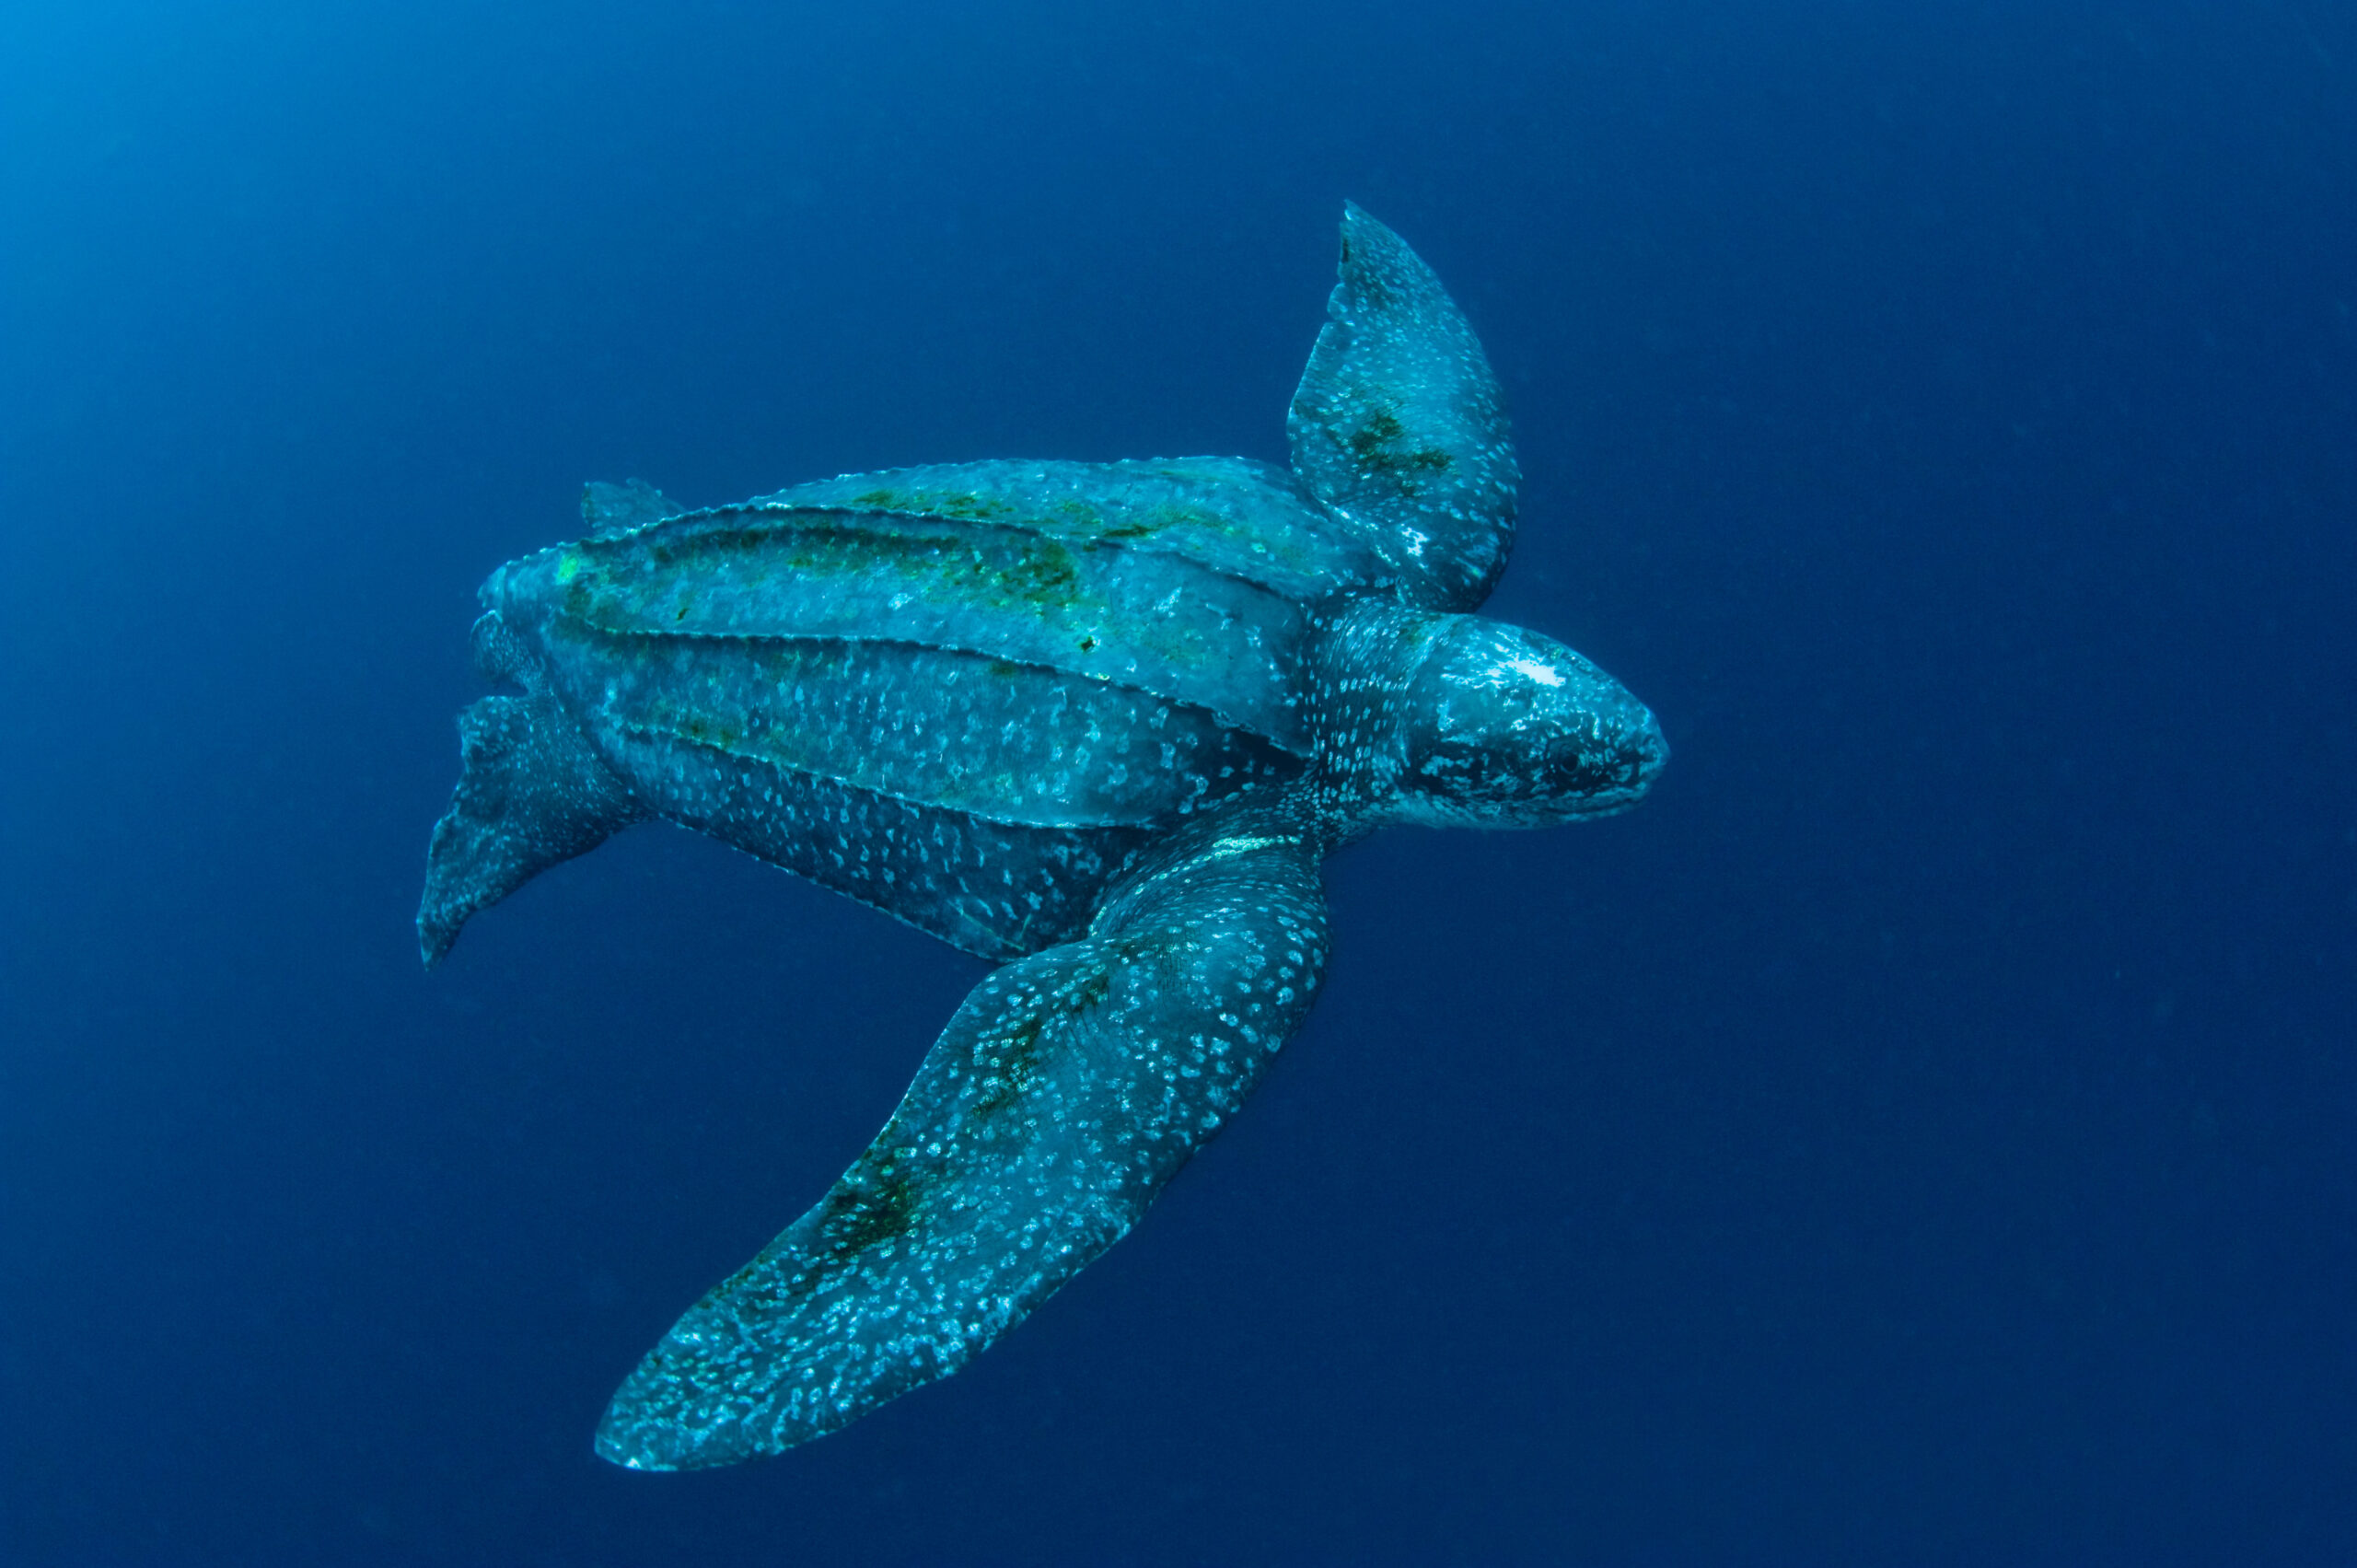 BBT384 Male Leatherback Sea Turtle (Dermochelys coriacea) photographed in the open ocean offshore Jupiter, Florida, USA. Image shot 2009. Exact date unknown.